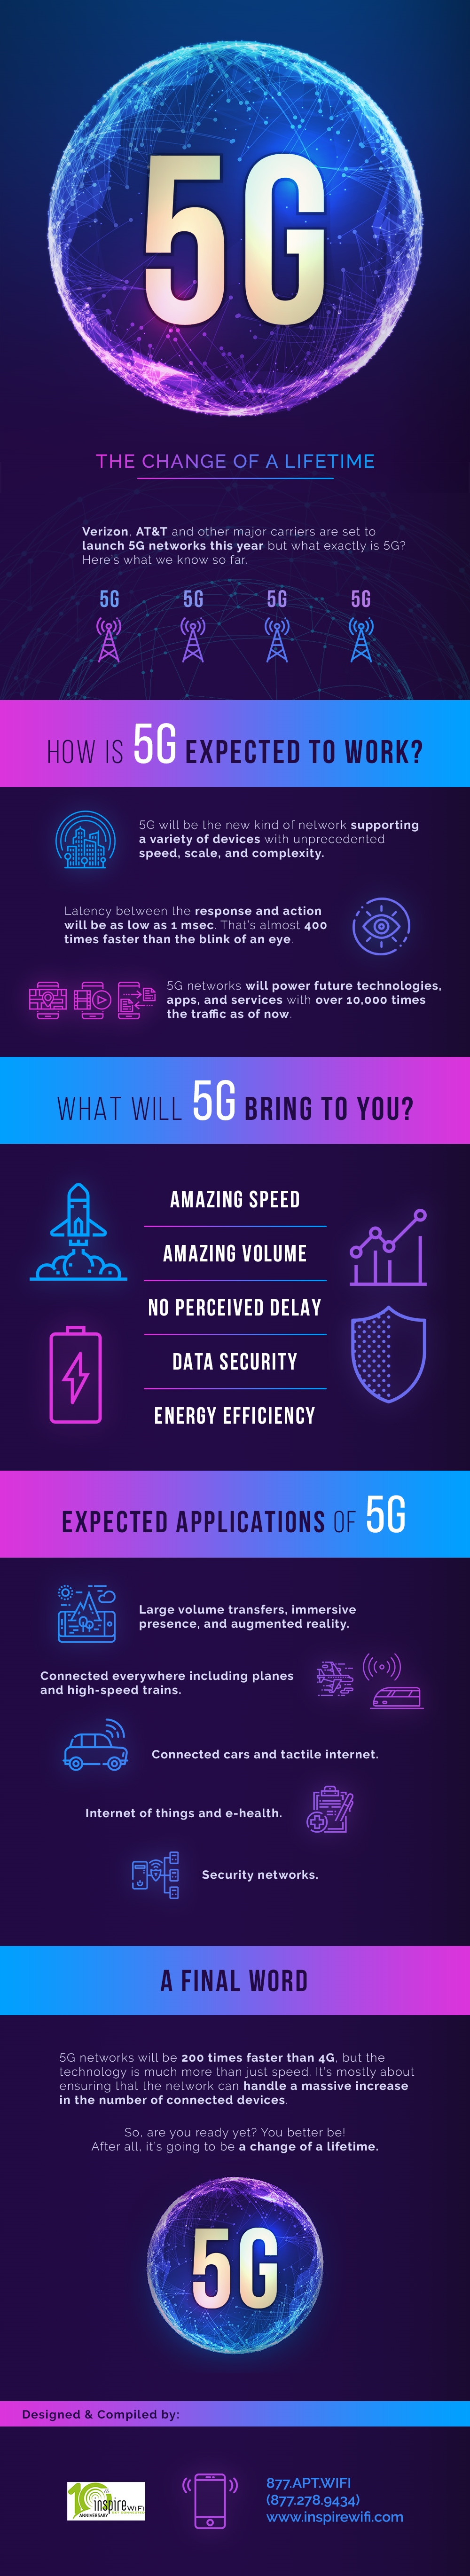 The Possible Rise of 5G: The Superfast Change of a Lifetime [Infographic] | DeviceDaily.com